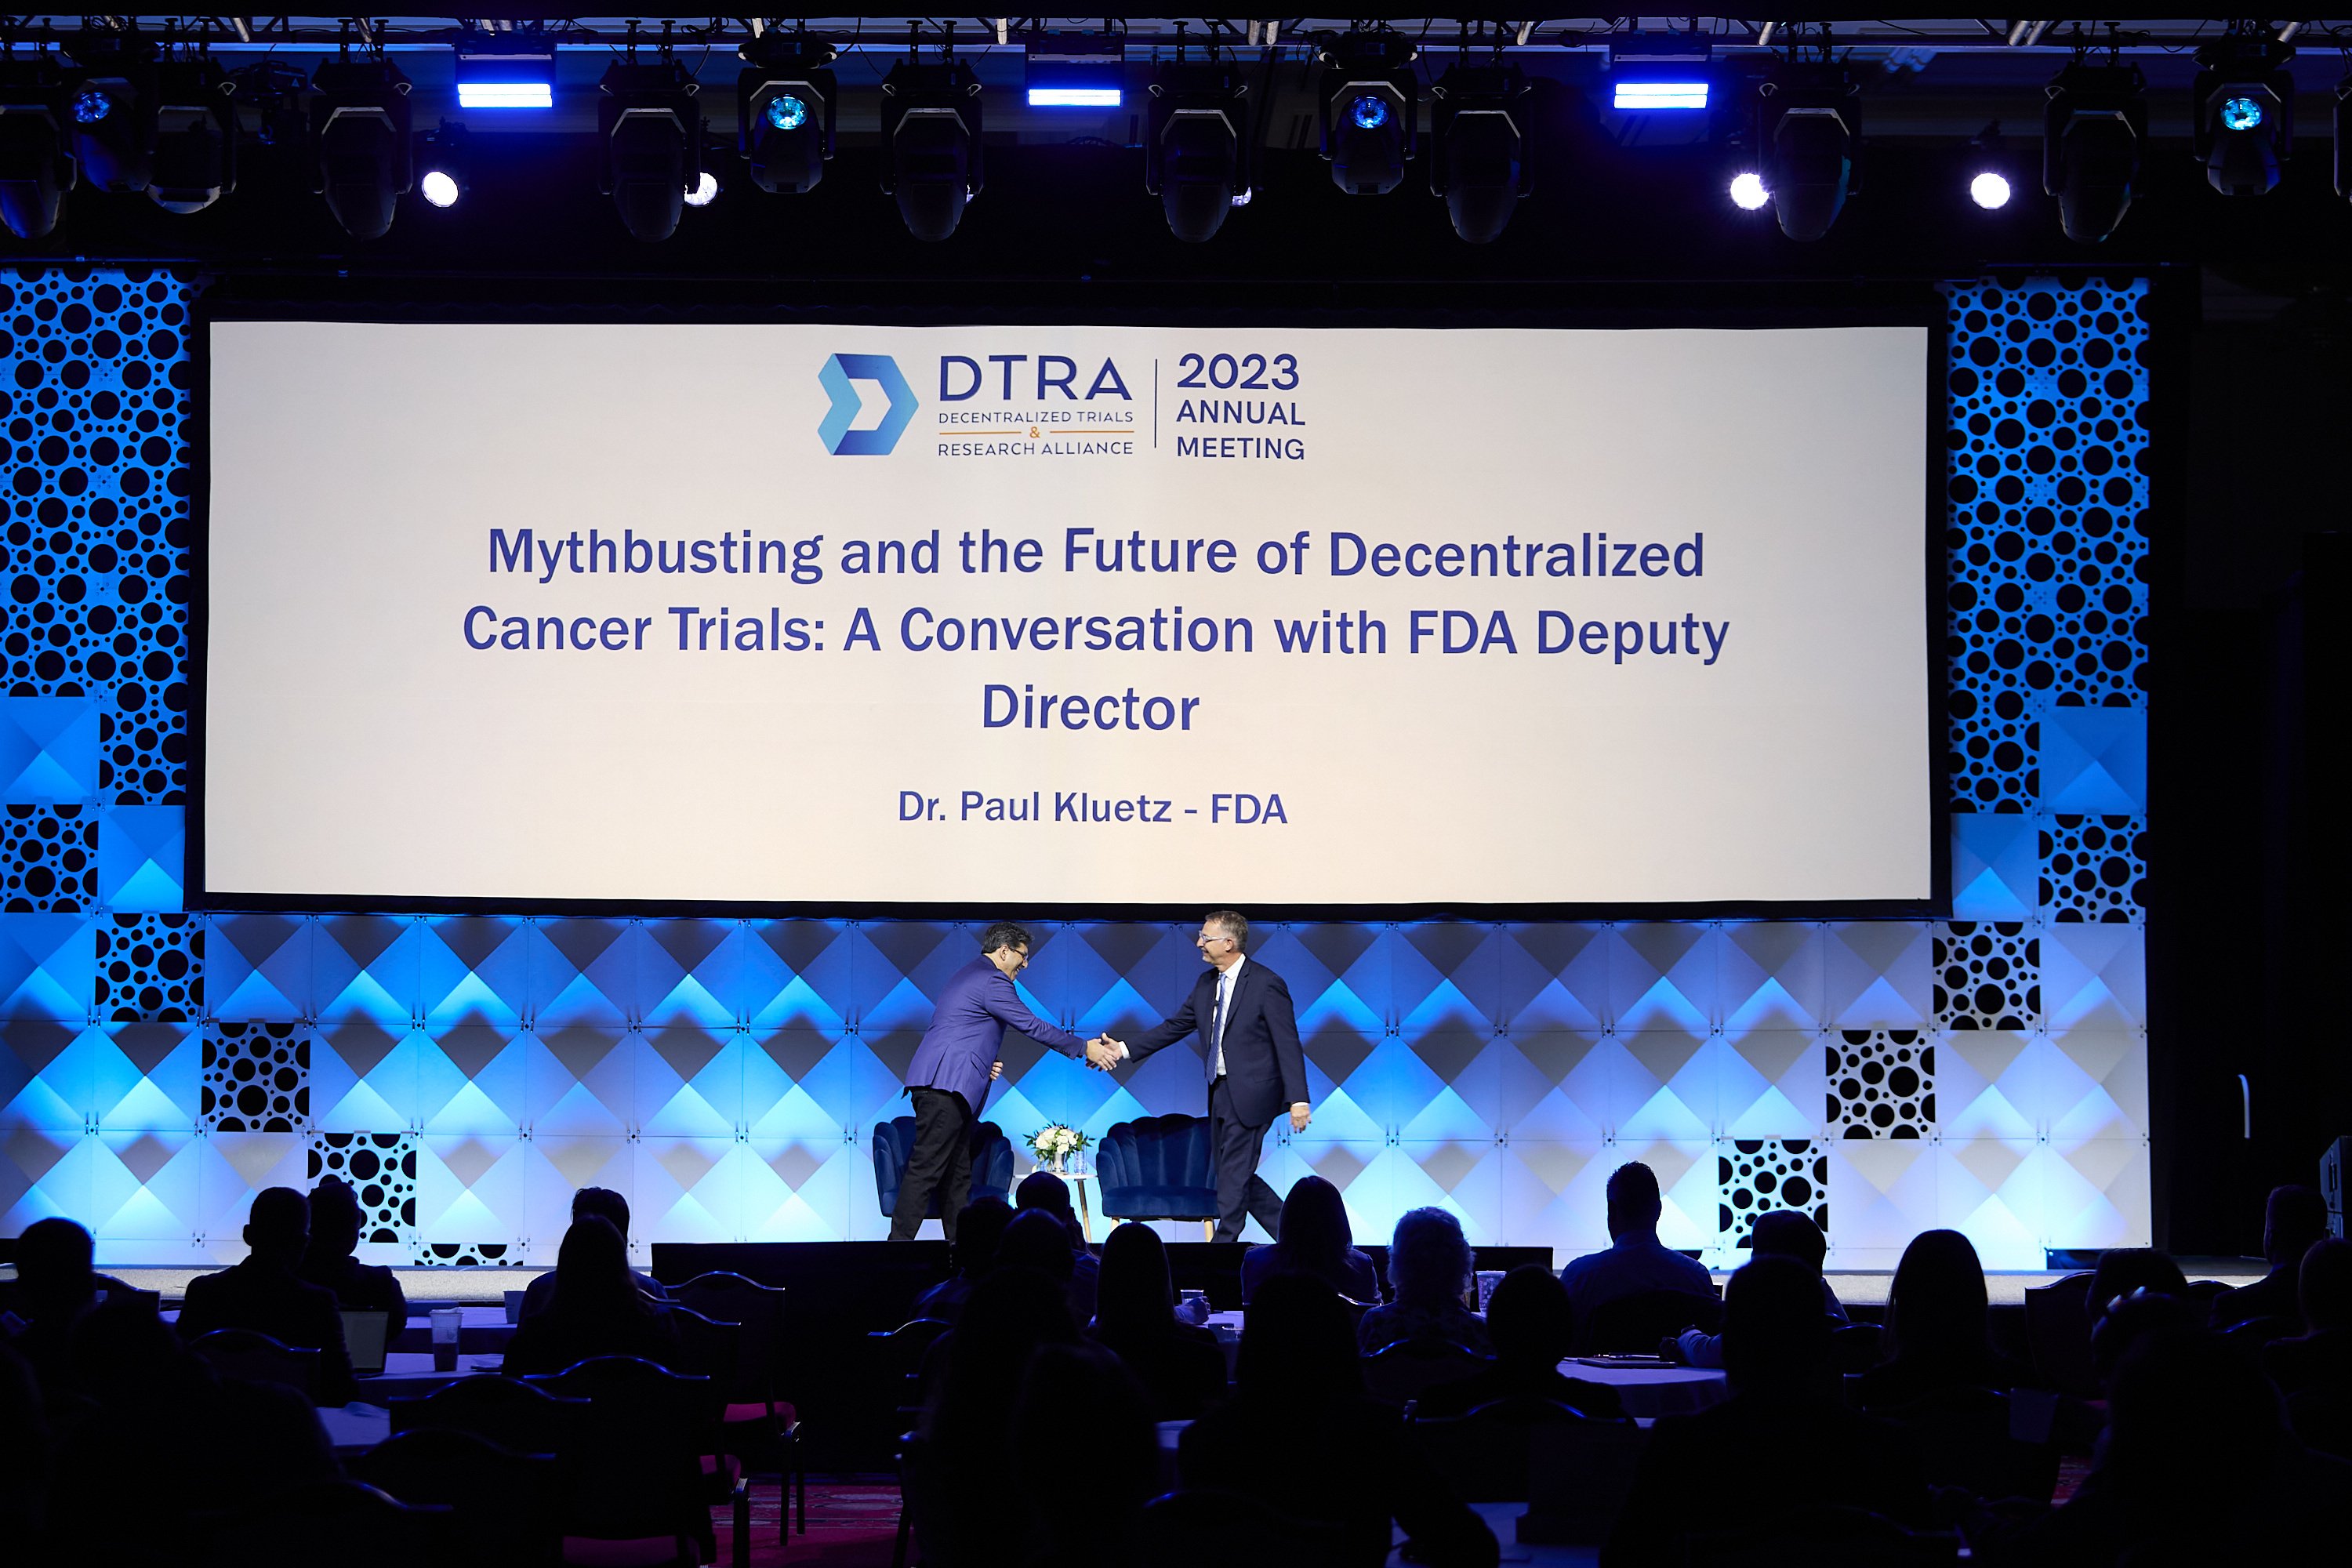 Decentralized Trials & Research Alliance (DTRA) Reaches Milestone of 100 Member Organizations